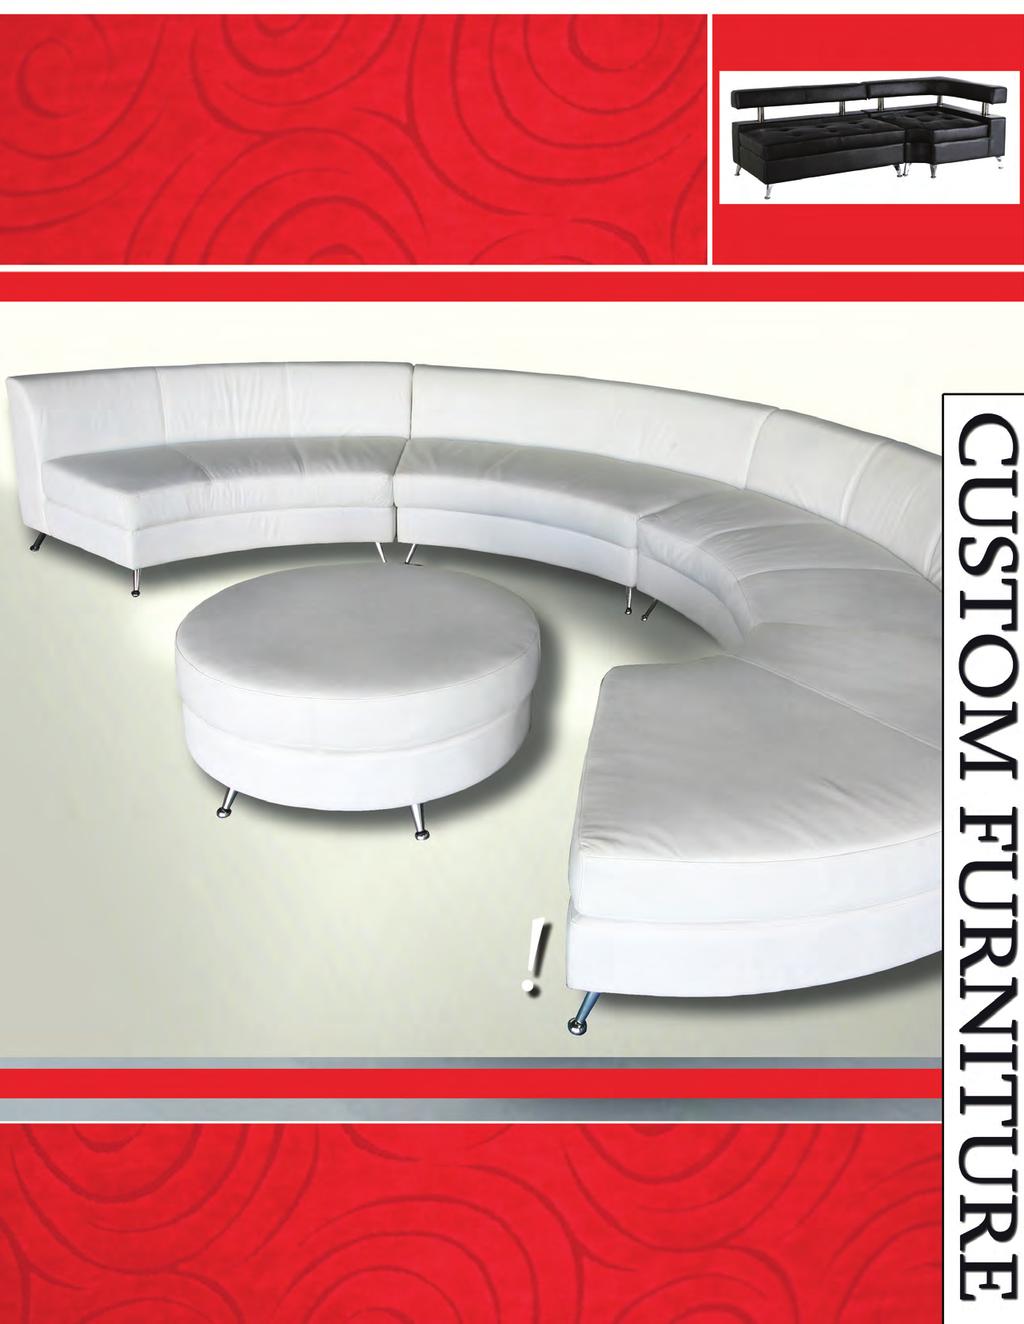 A CCENT Tradeshow & Event Furnishings v012.1 www.